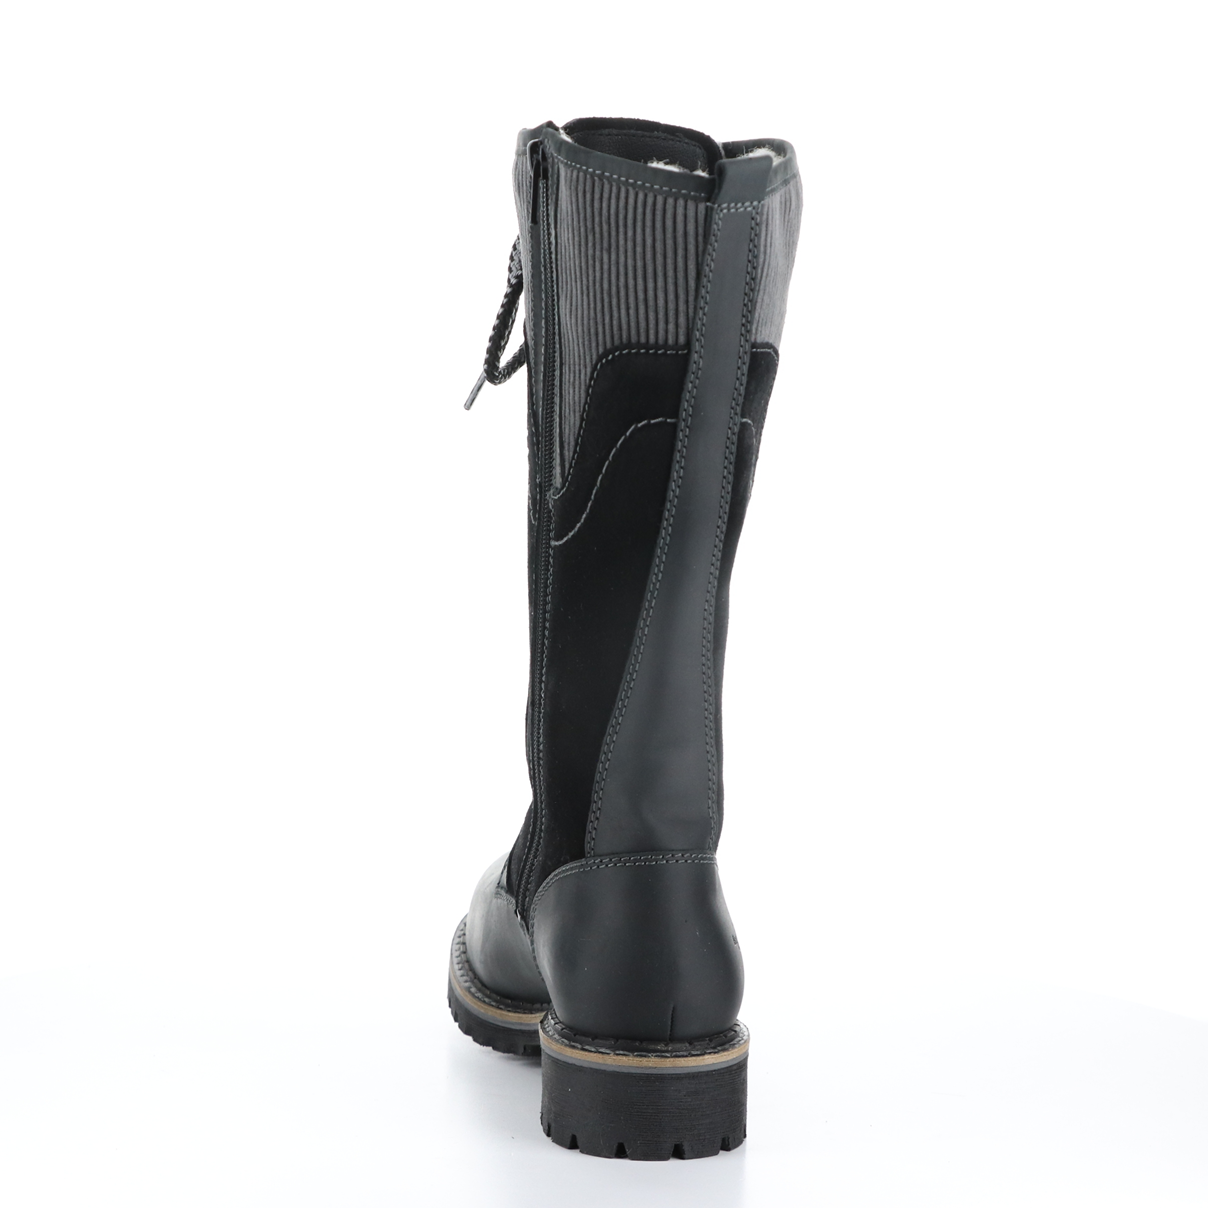 Back view of the bos & co harrsion boot in the color black/grey. This boot is calf-height. It has a lace up front and panels of suede leather, burnished leather, and corduroy.  The inner side of this boot has a zipper.